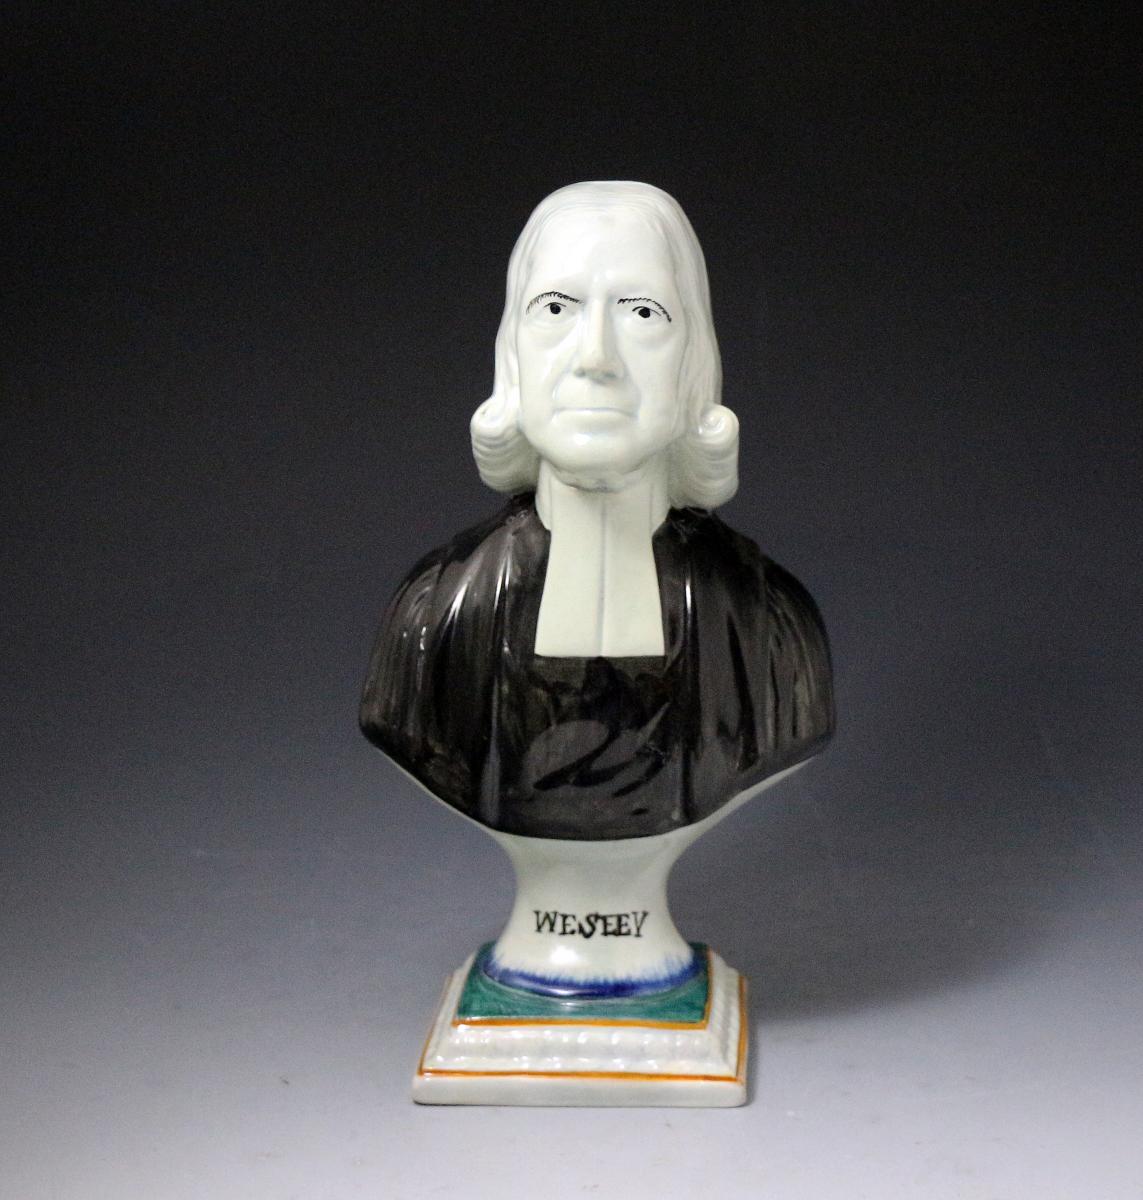 Yorkshire pottery bust of Wesley founder of Methodism early 19th century